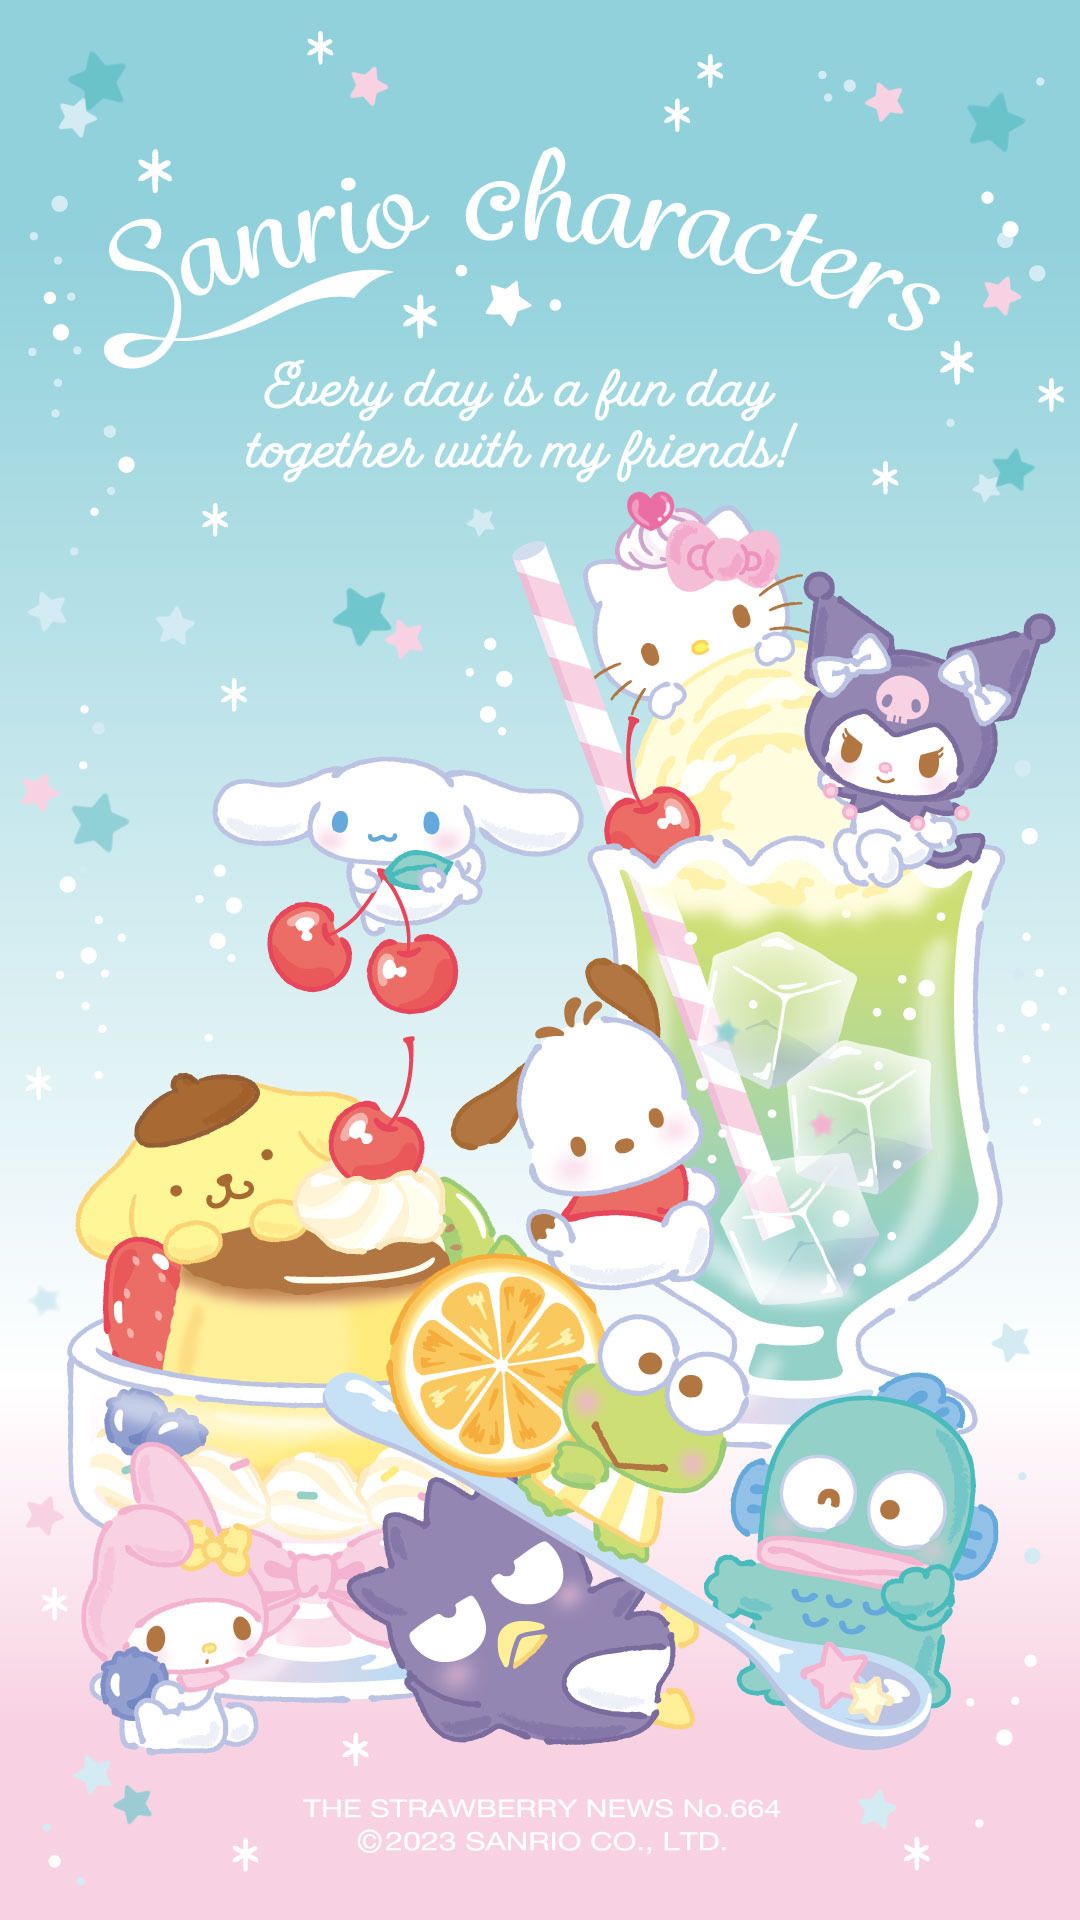 Sanrio characters wallpaper for phone with cute illustration of hello kitty and friends enjoying a party - Sanrio